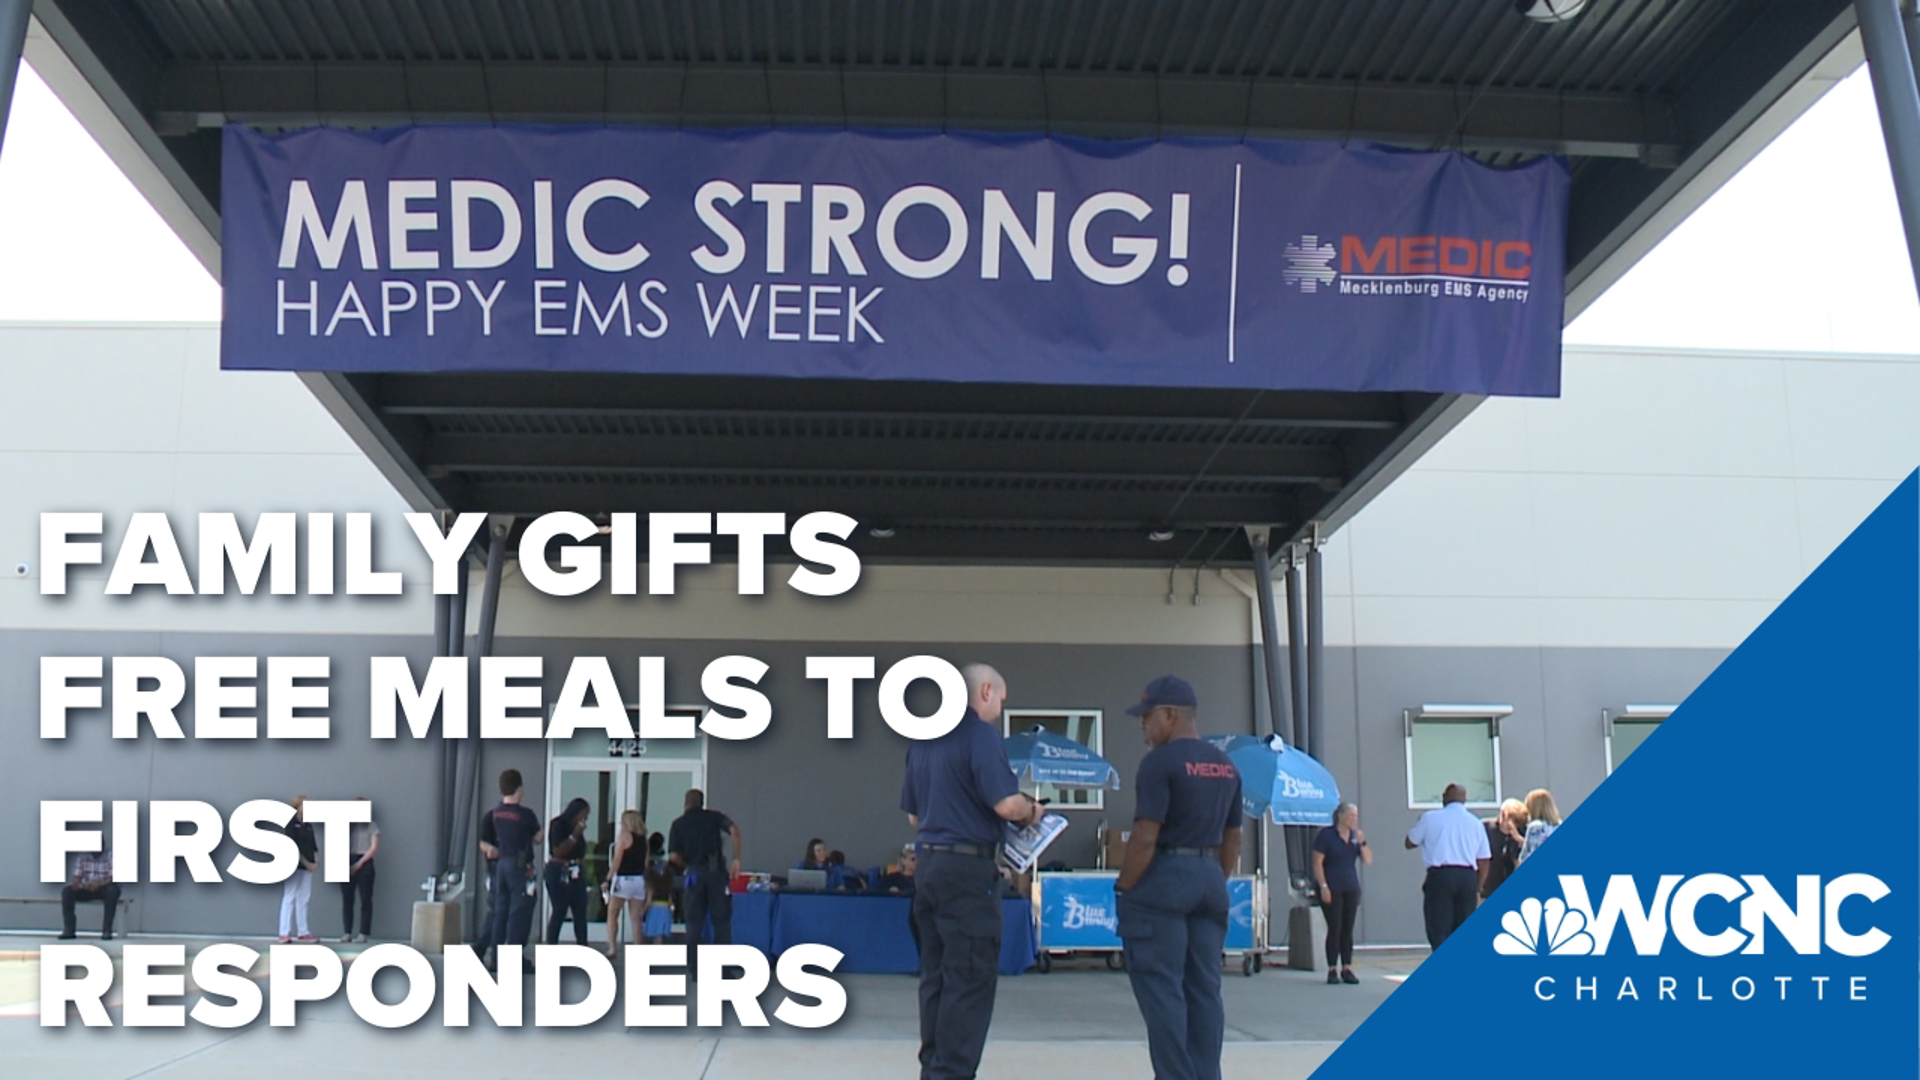 A salute to our heroes here in the queen city. The Salute to Heroes Foundation is providing free meals to first responders.